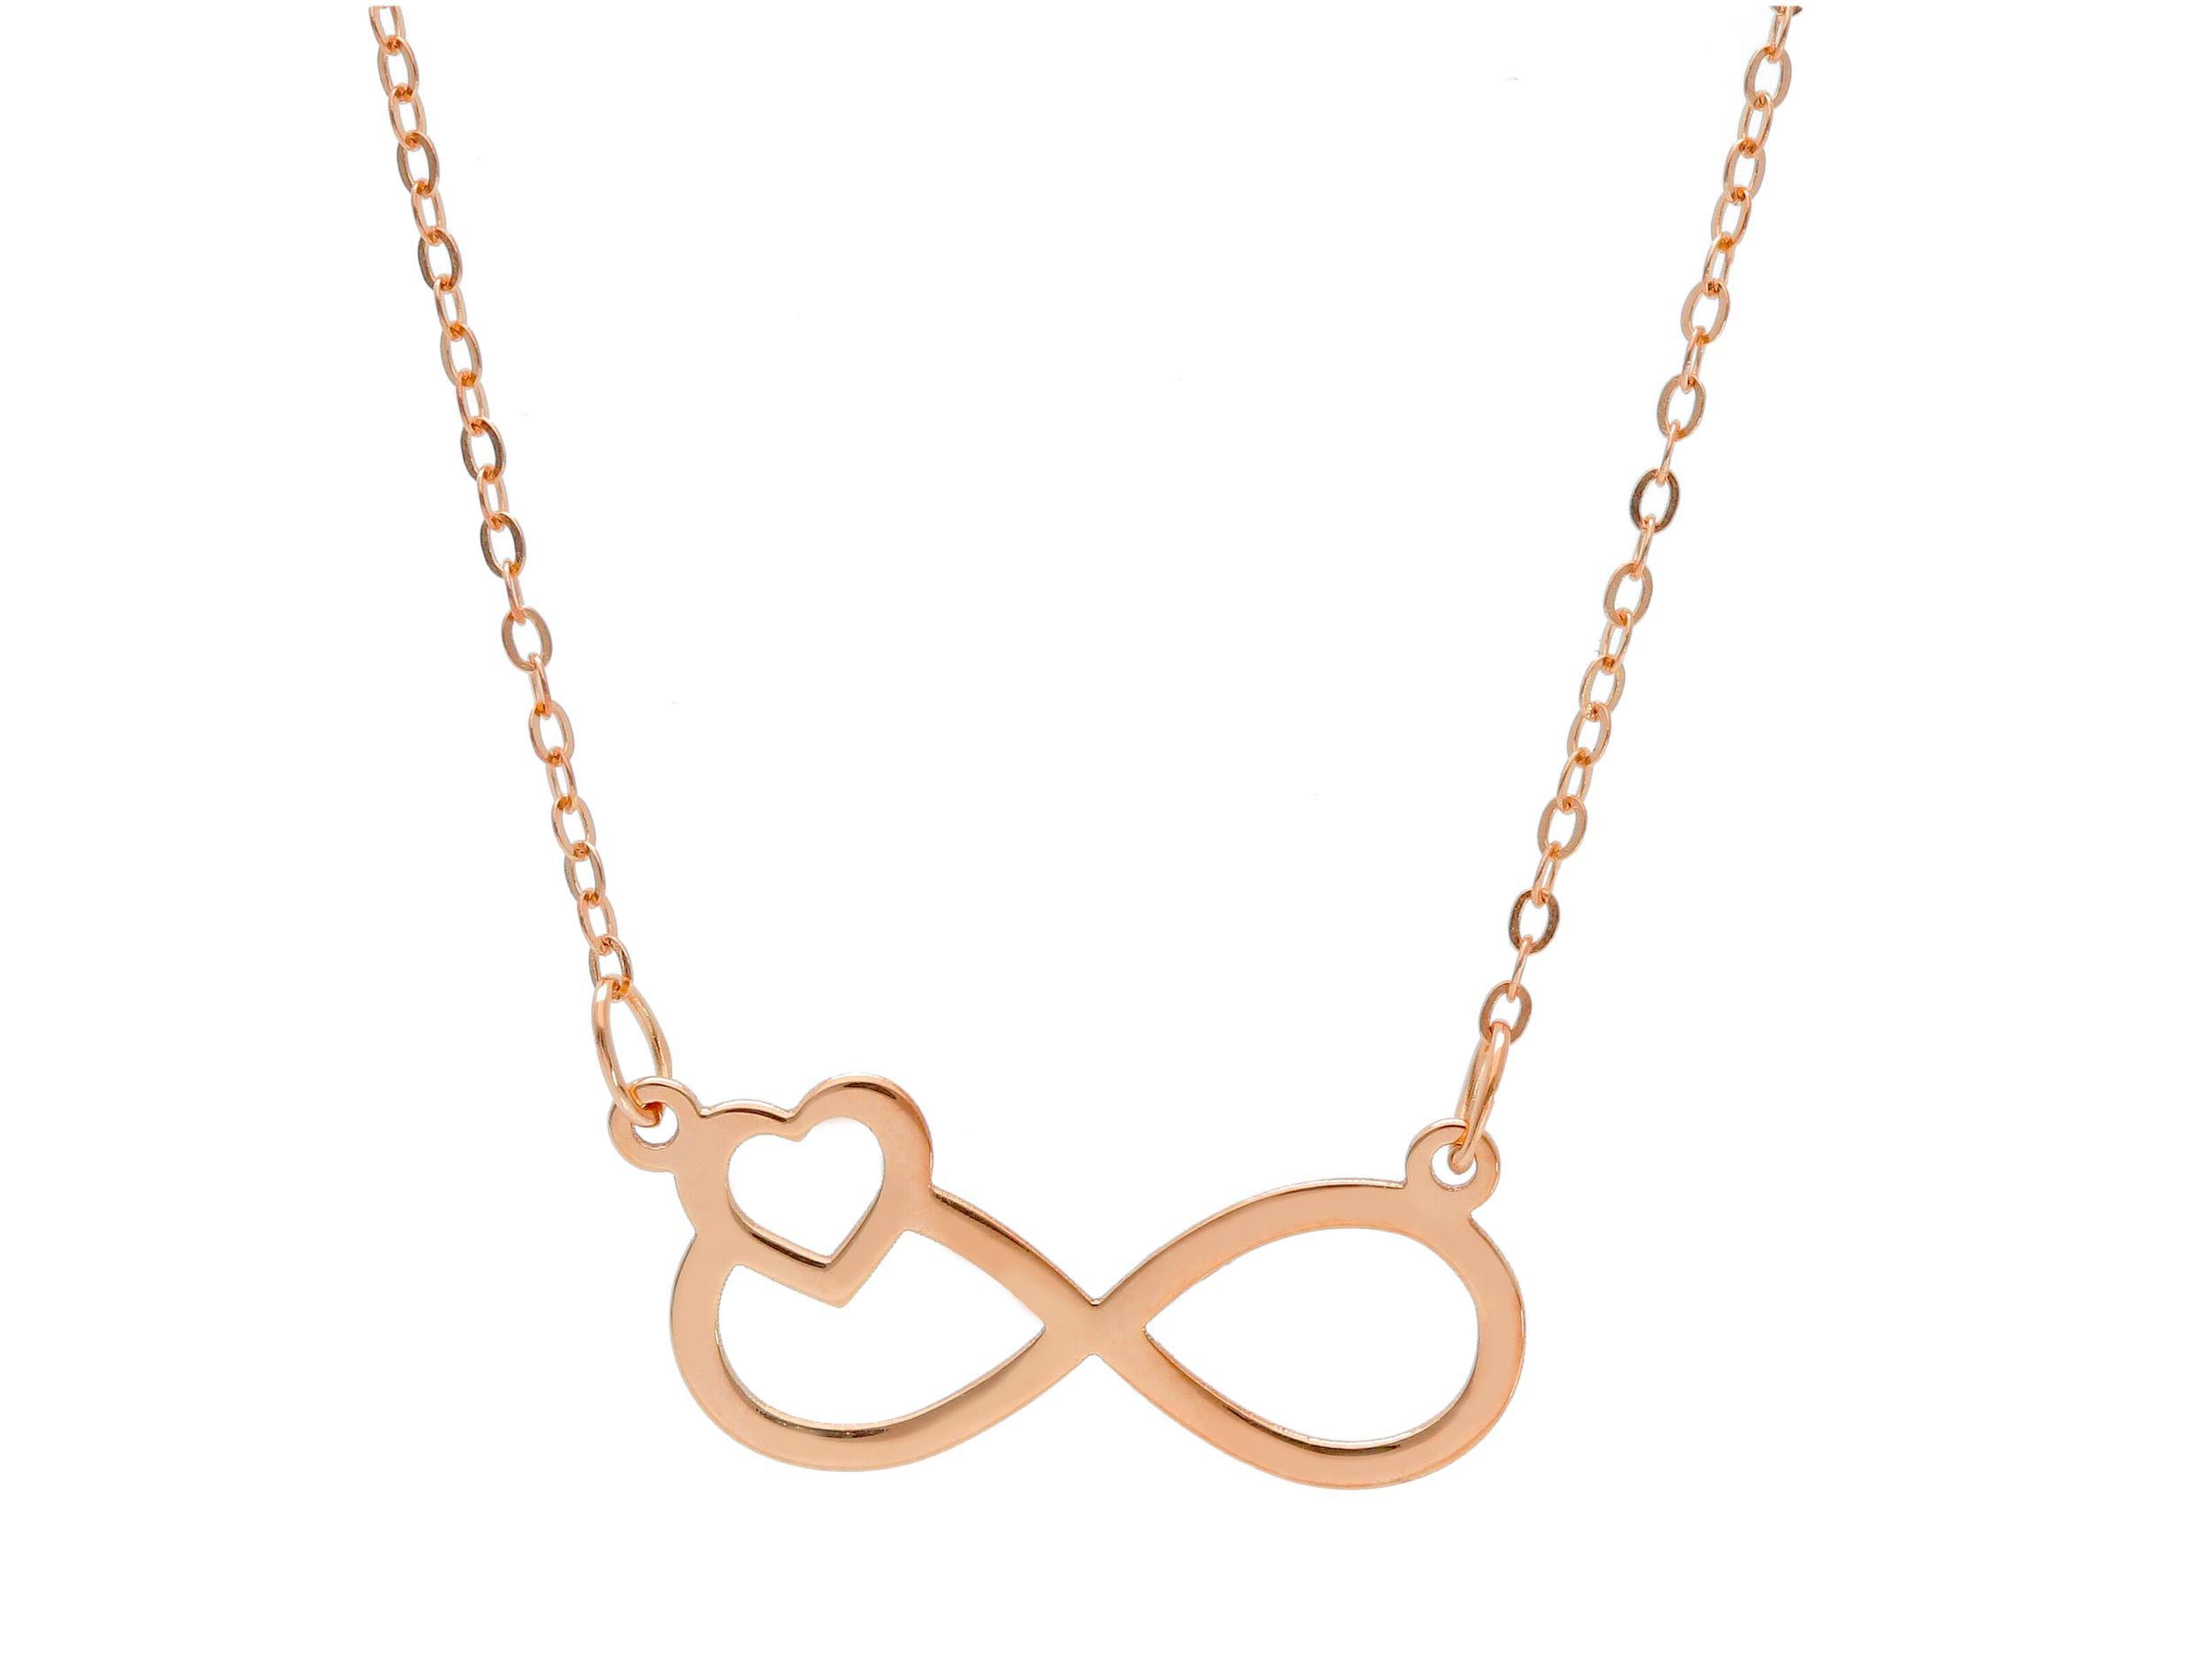 Rose gold necklace with the infinity symbol k9 (code S249366)